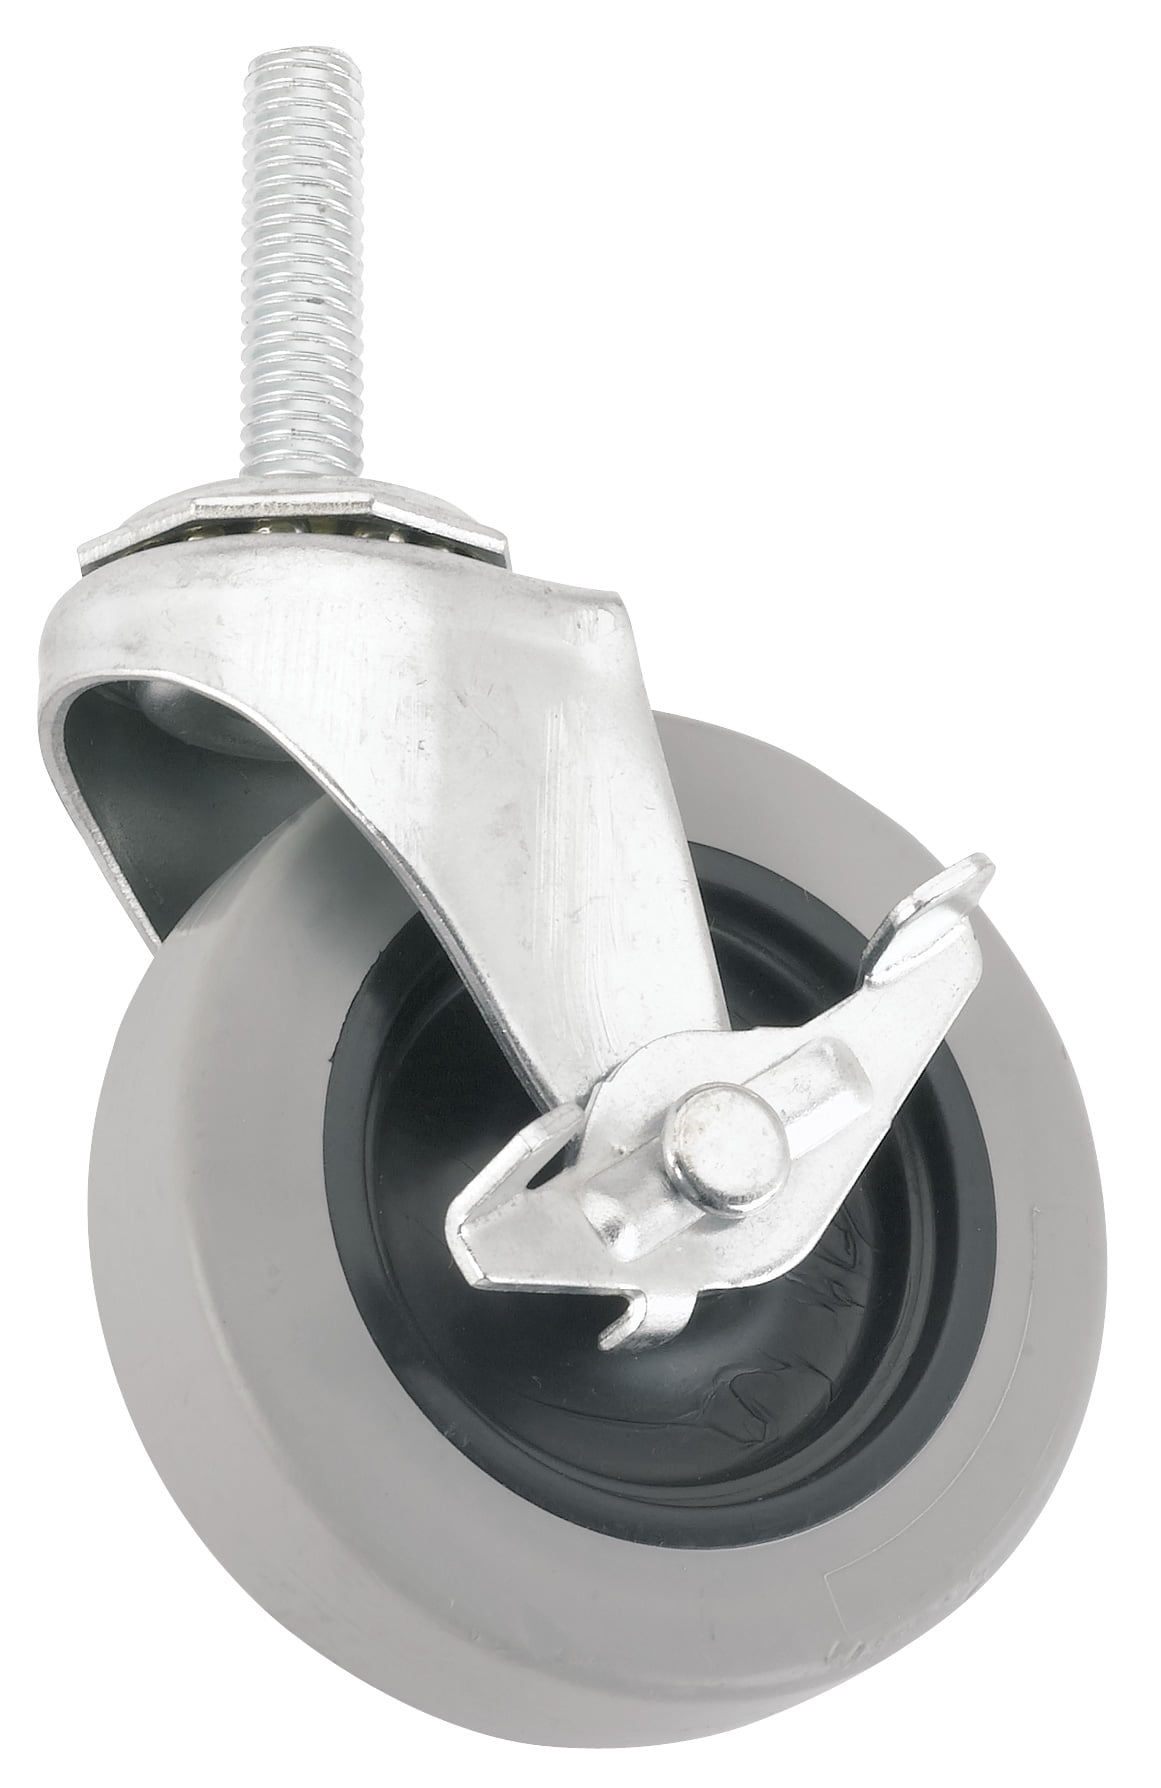 2 Pieces Swivel castors with Turntable 1.25 inch Diameter TPR Top Plate 33 lb Capacity 